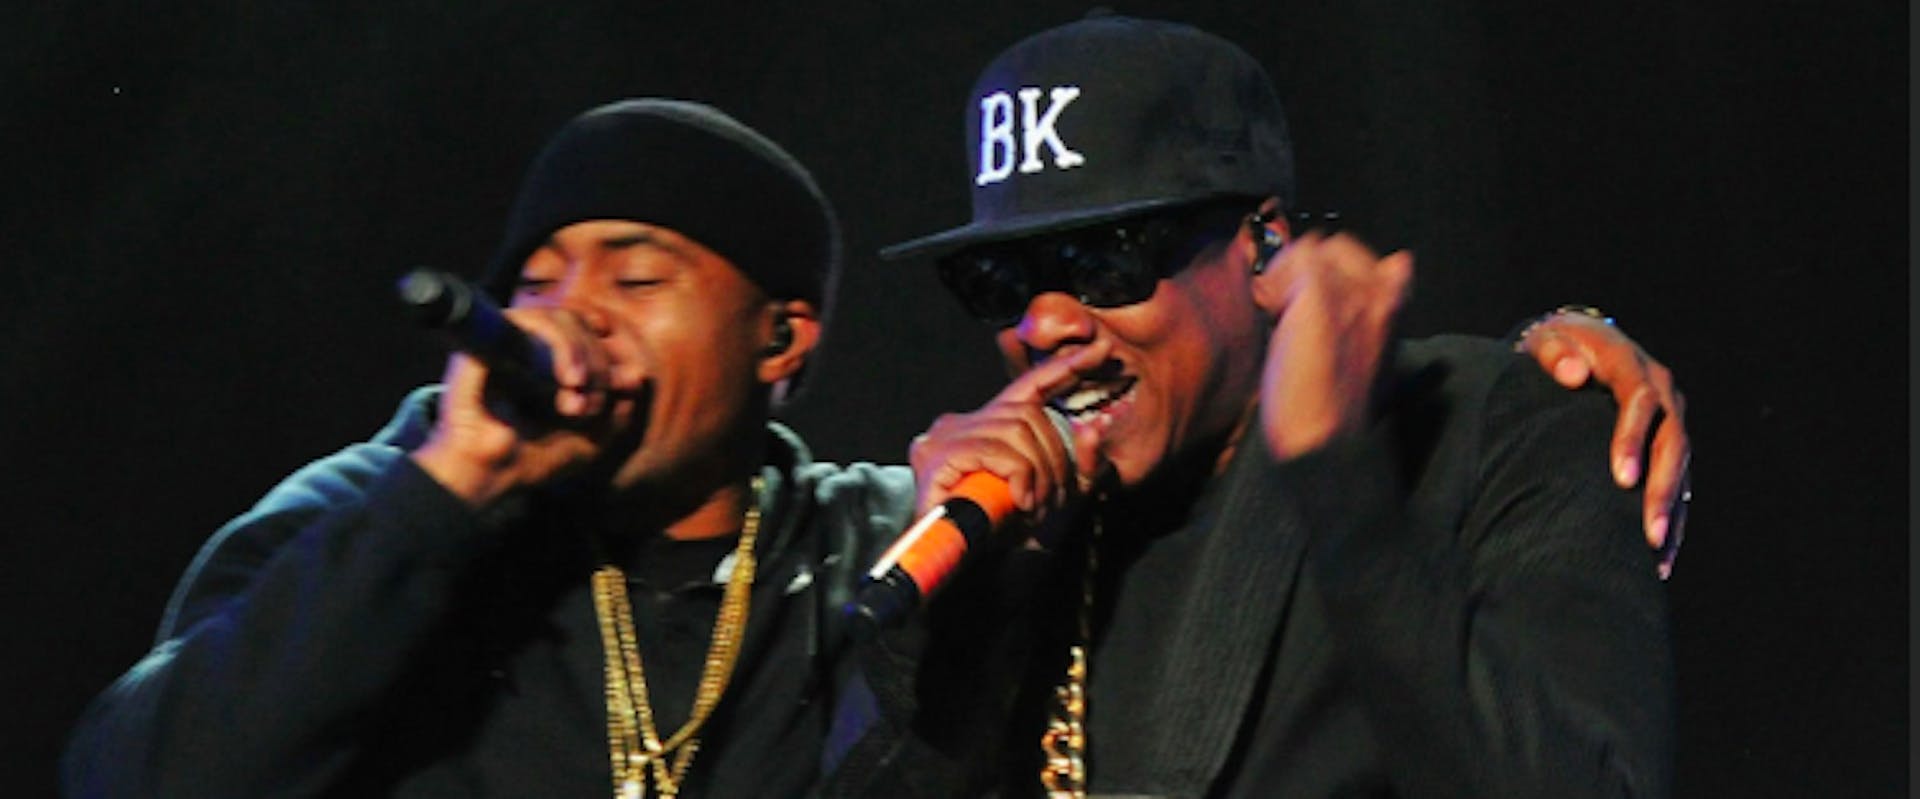 INDIO, CA - APRIL 12: Rappers Nas (L) and Jay-Z perform onstage during day 2 of the 2014 Coachella Valley Music & Arts Festival at the Empire Polo Club on April 12, 2014 in Indio, California. 